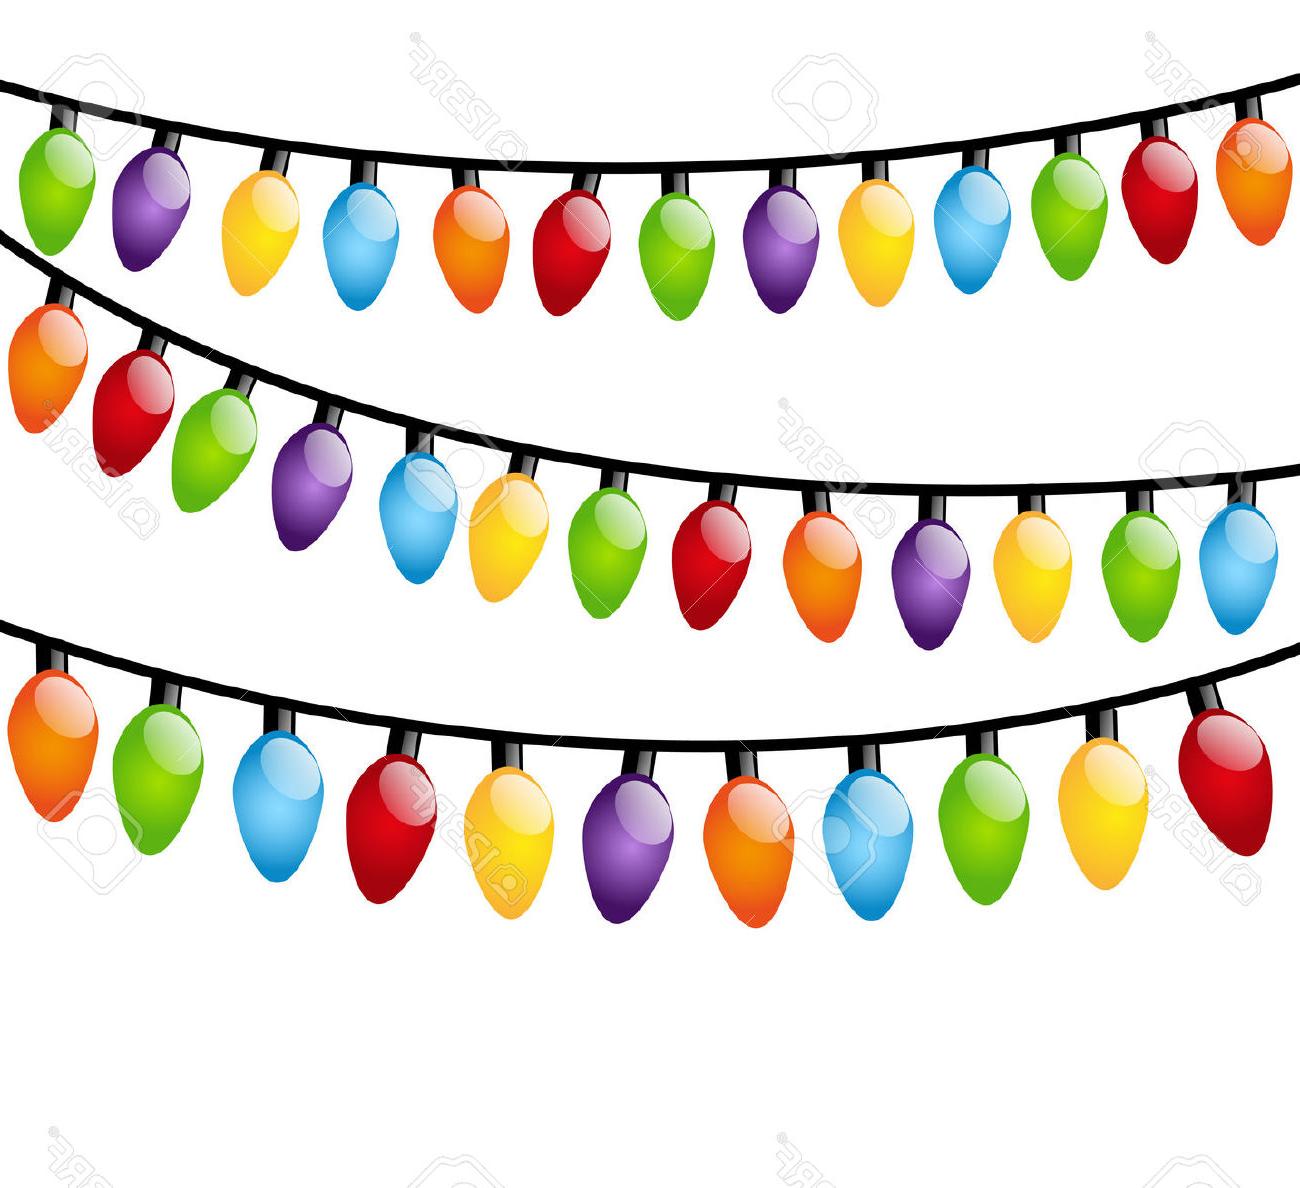 Download Christmas Lights Vector Free at GetDrawings | Free download